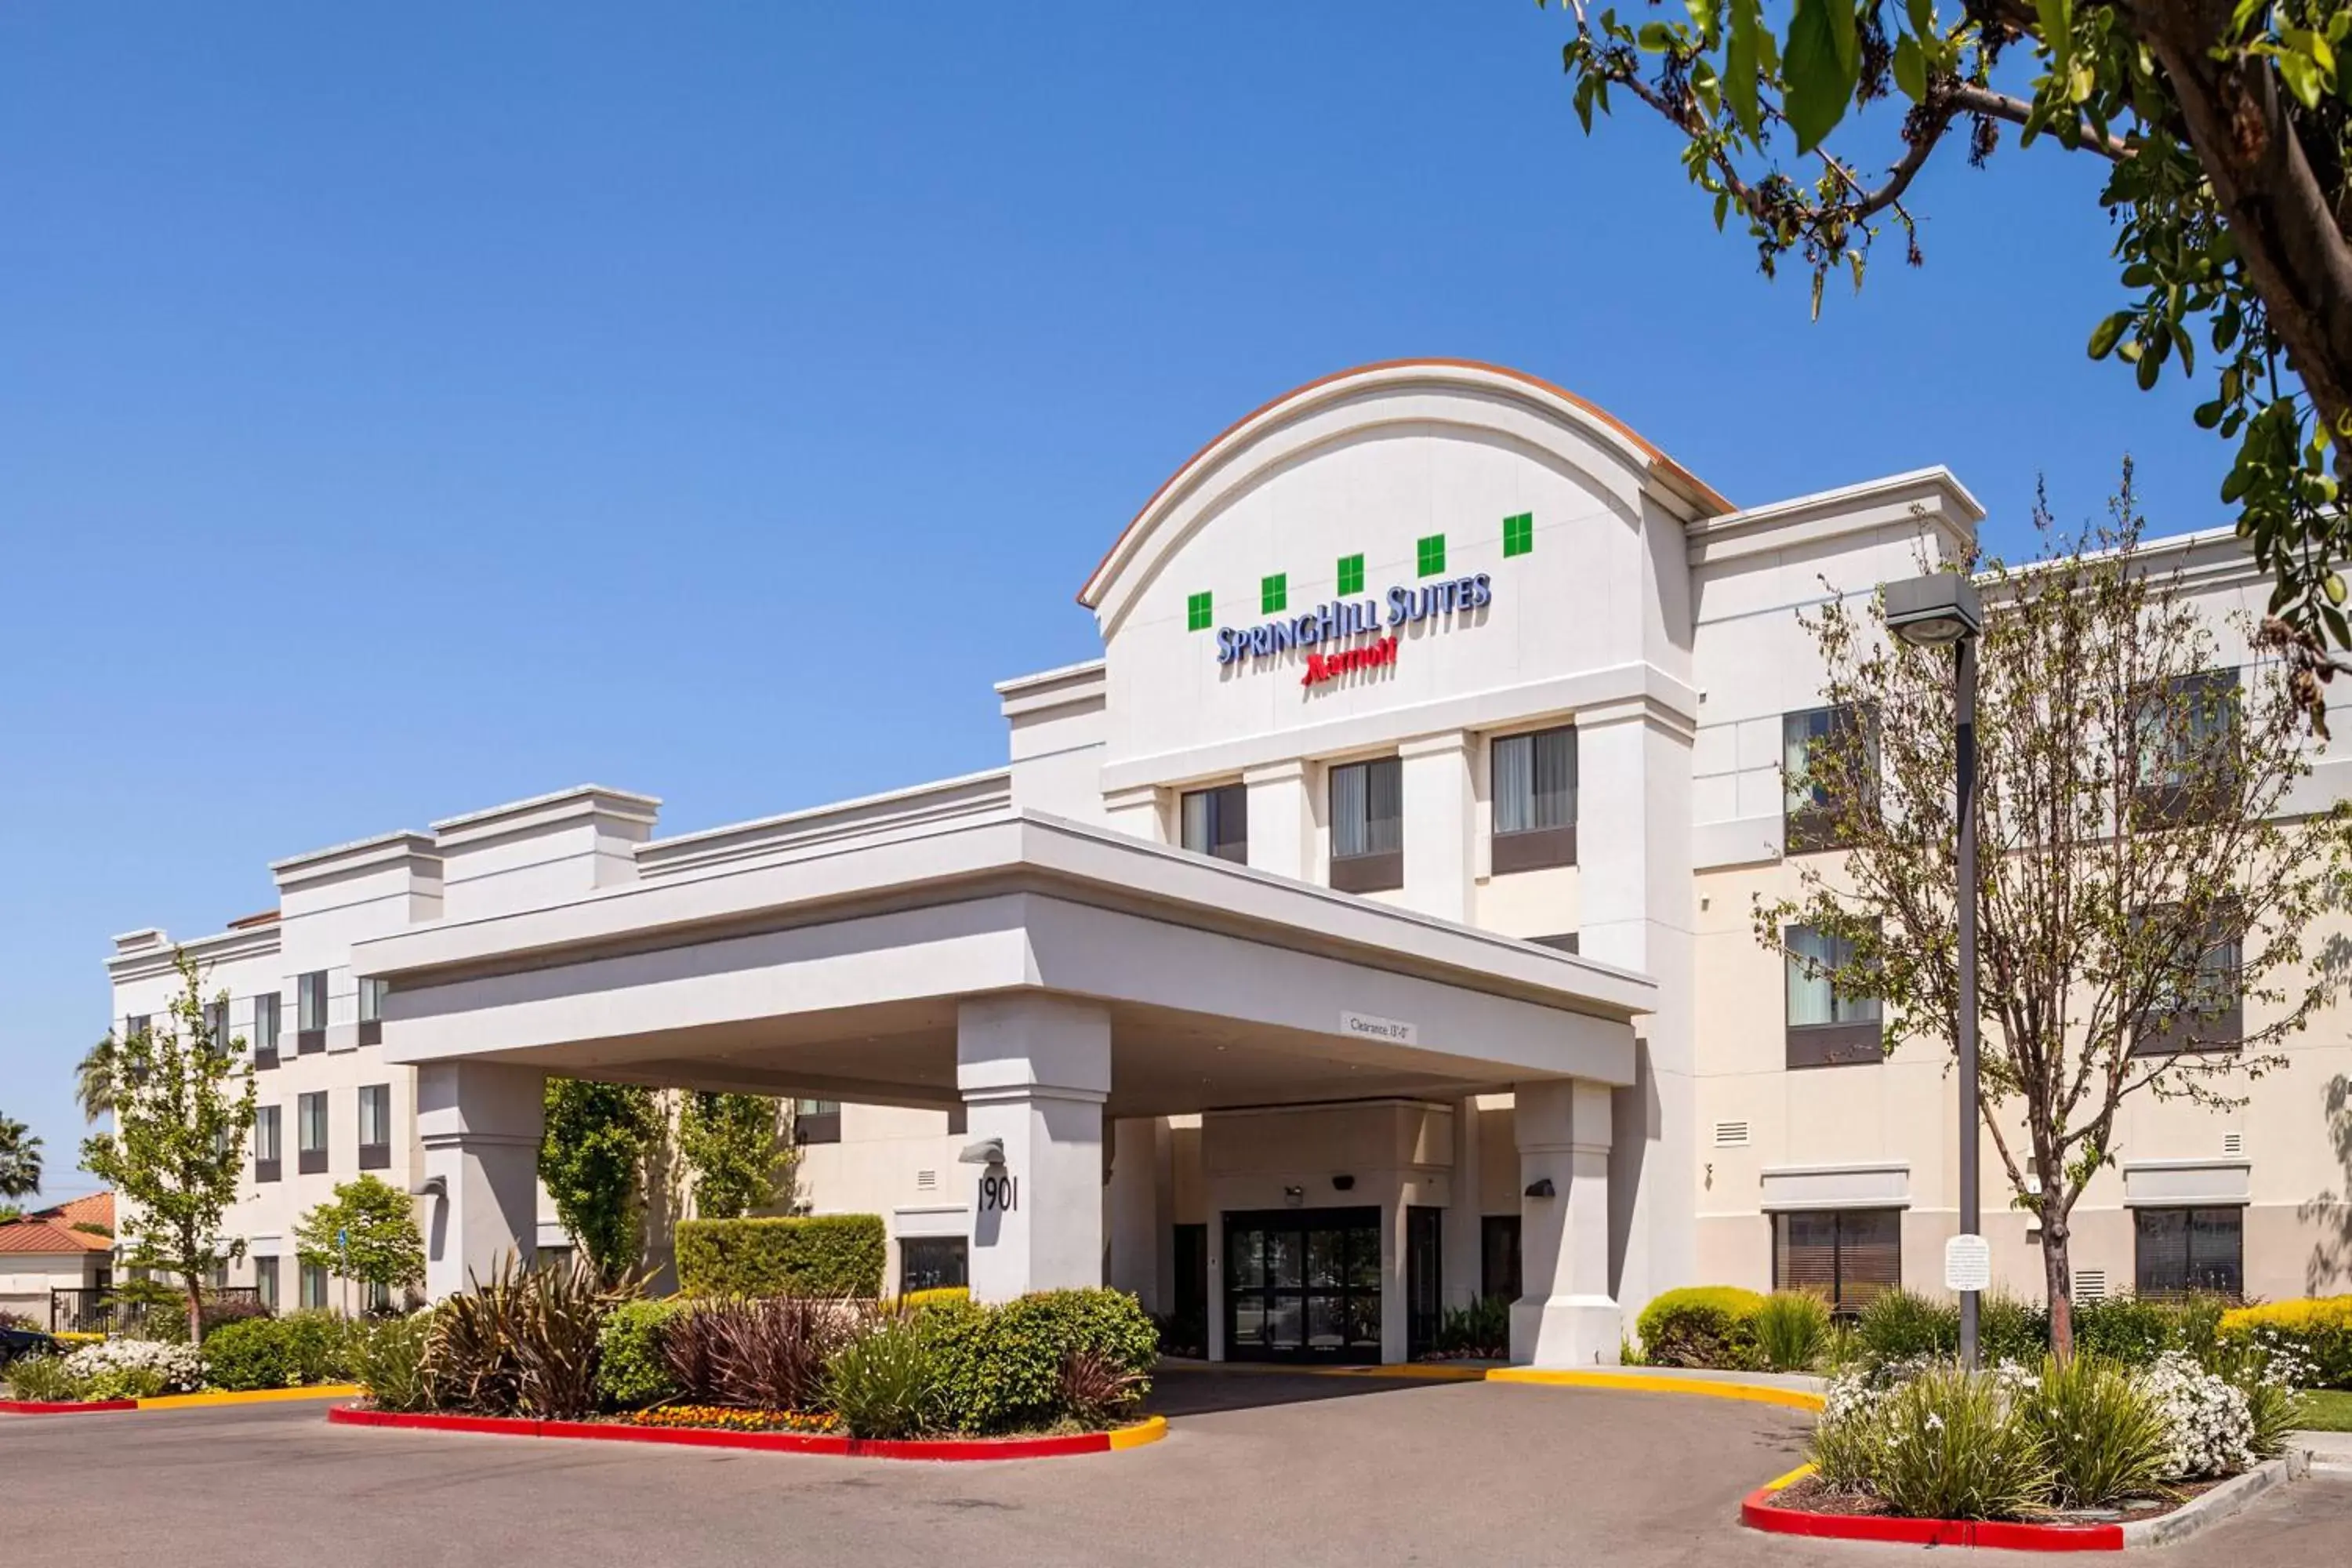 Property Building in SpringHill Suites by Marriott Modesto